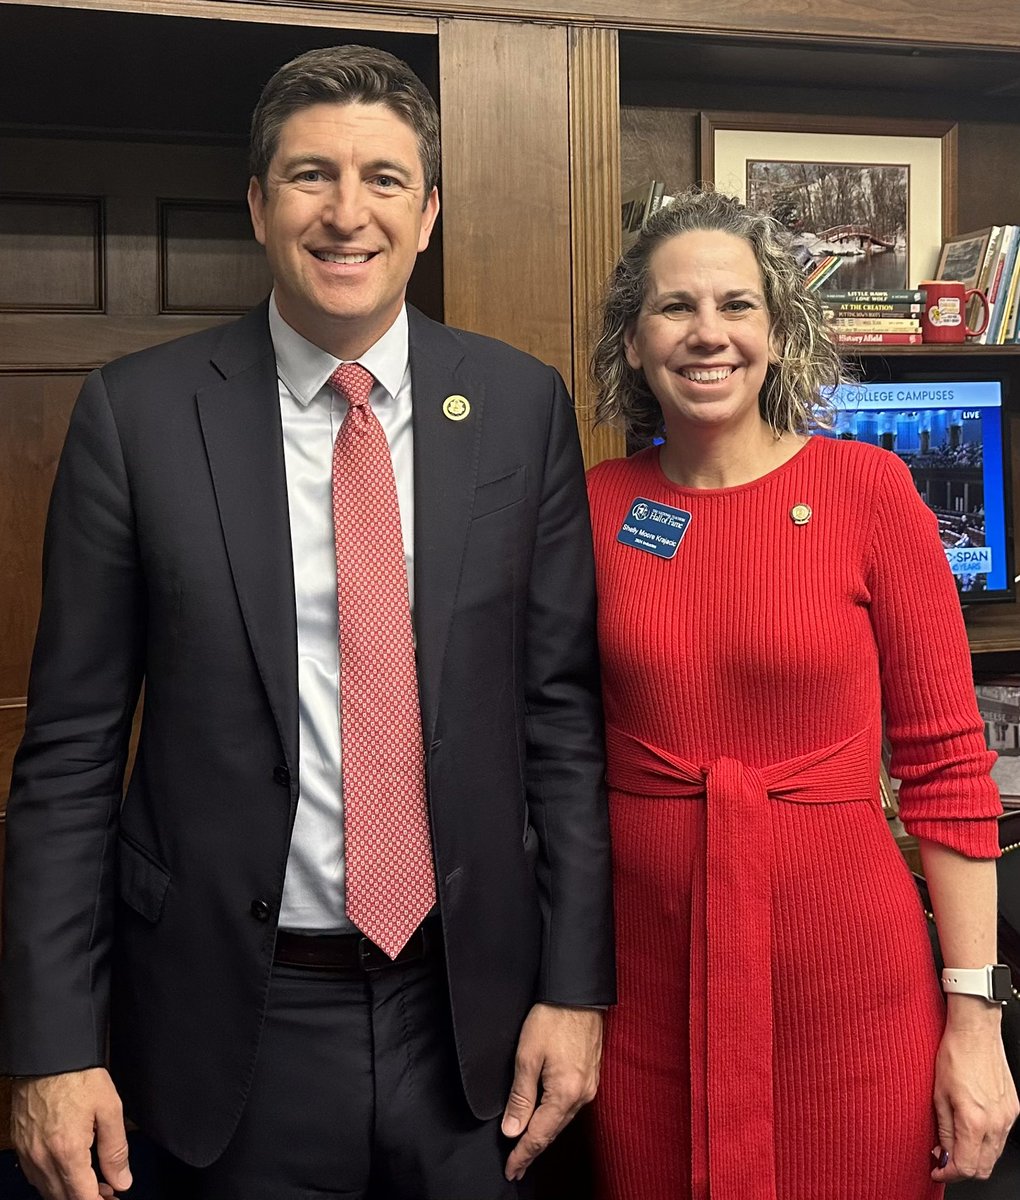 Kenosha’s Shelly Moore Krajacic was one of two Wisconsin teachers inducted into the National Teachers Hall of Fame. The program only recognizes five teachers nationally every year.   It was great to meet with Shelly ahead of her recognition!